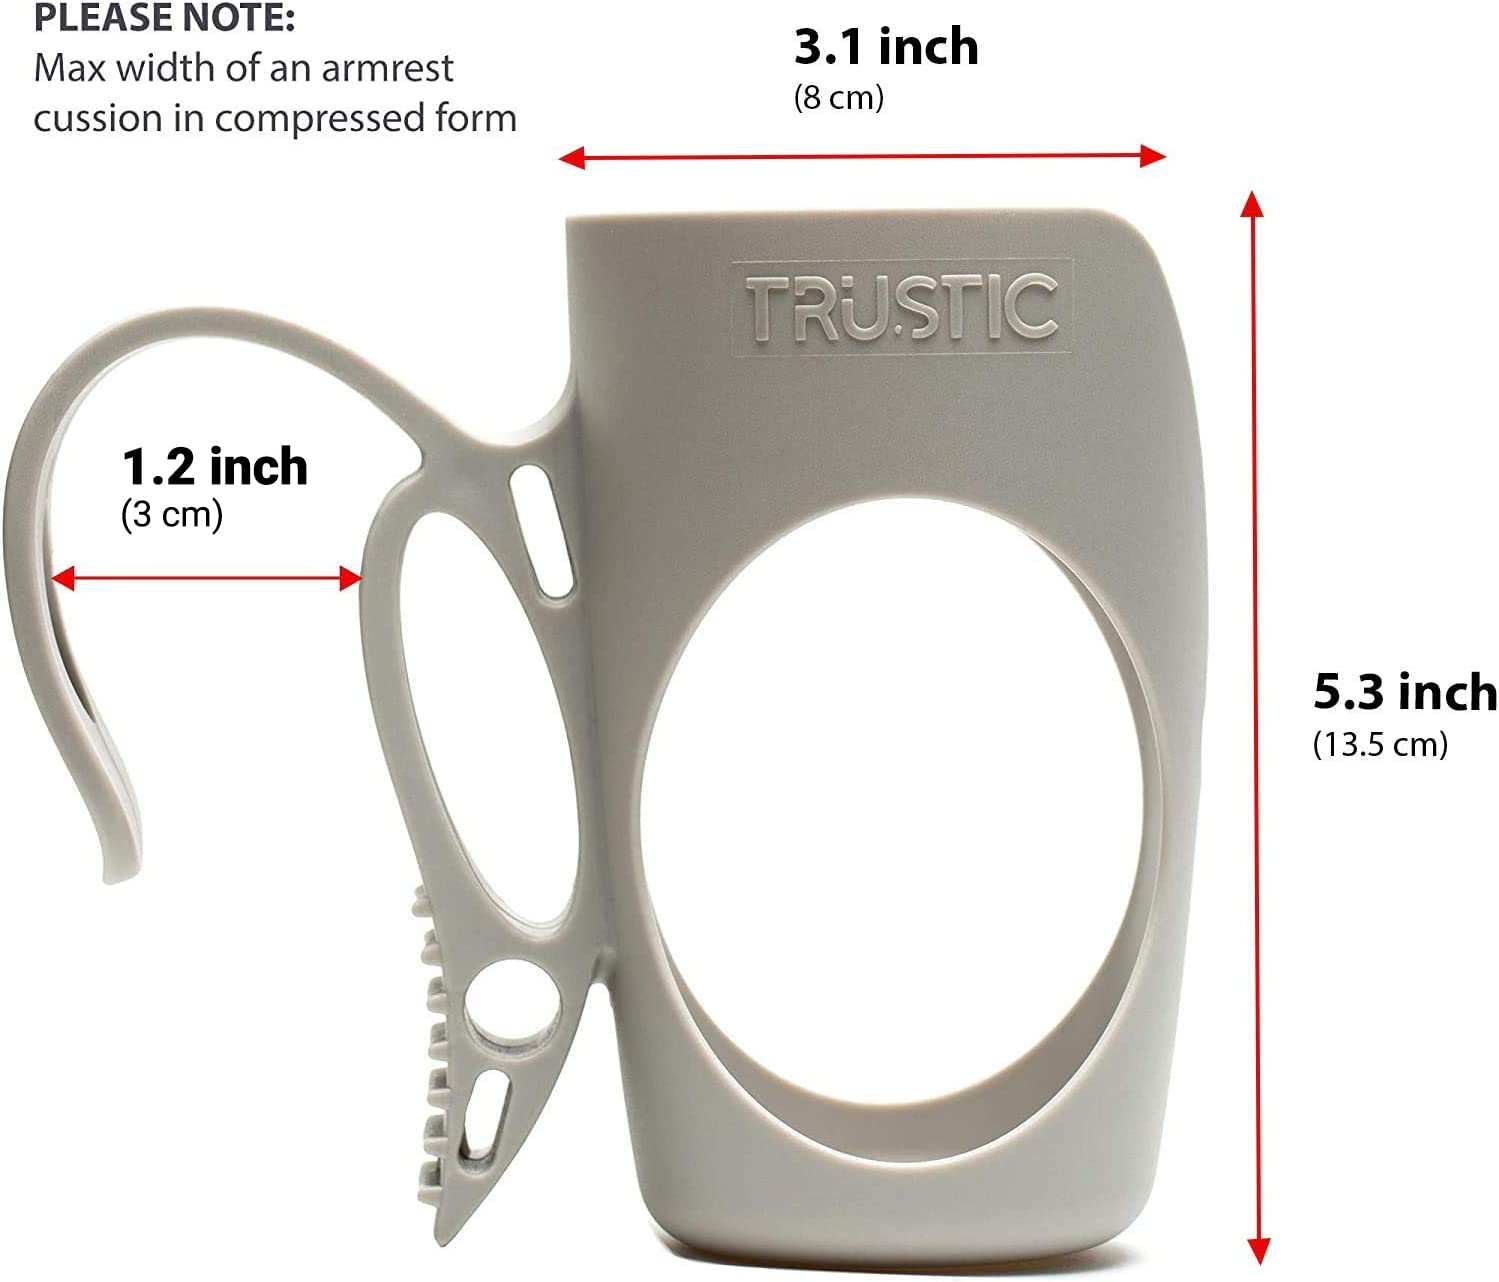 Trustic - Child Cup Holder for Convertible Car Seats - Compatible with Britax ClickTight Marathon, Boulevard, Advocate Car Seats  - Like New